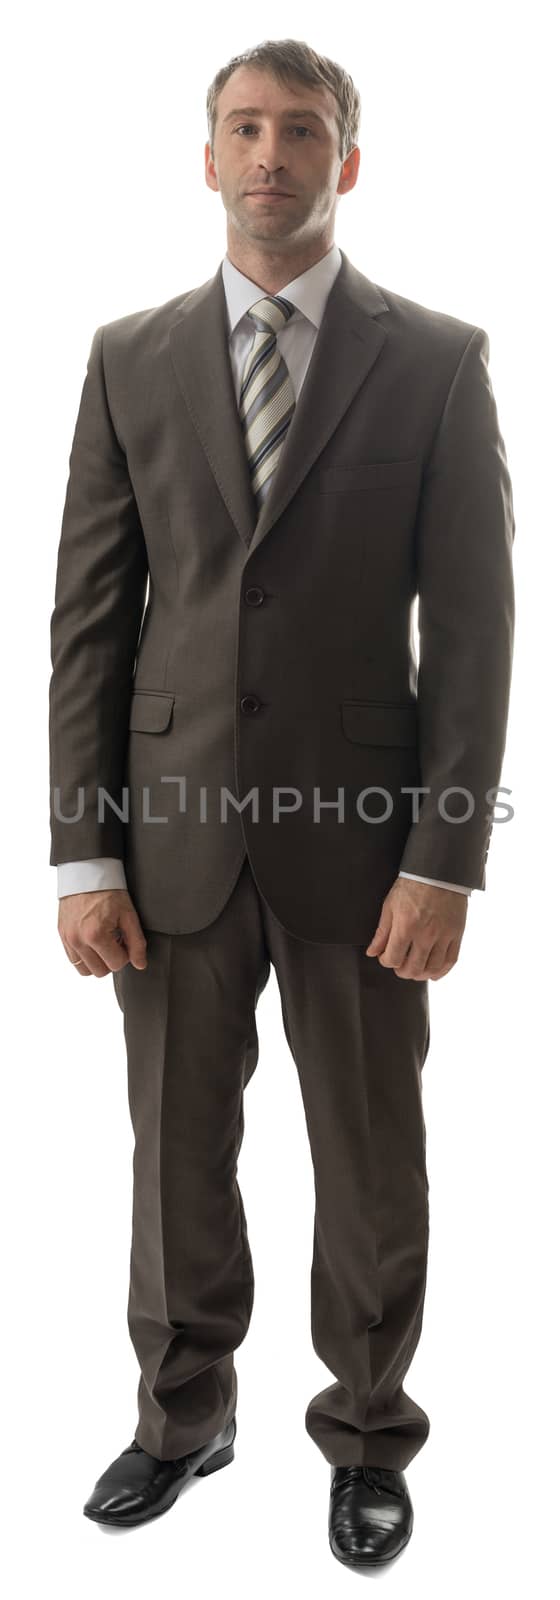 Confidence businessman in suit looking at camera by cherezoff